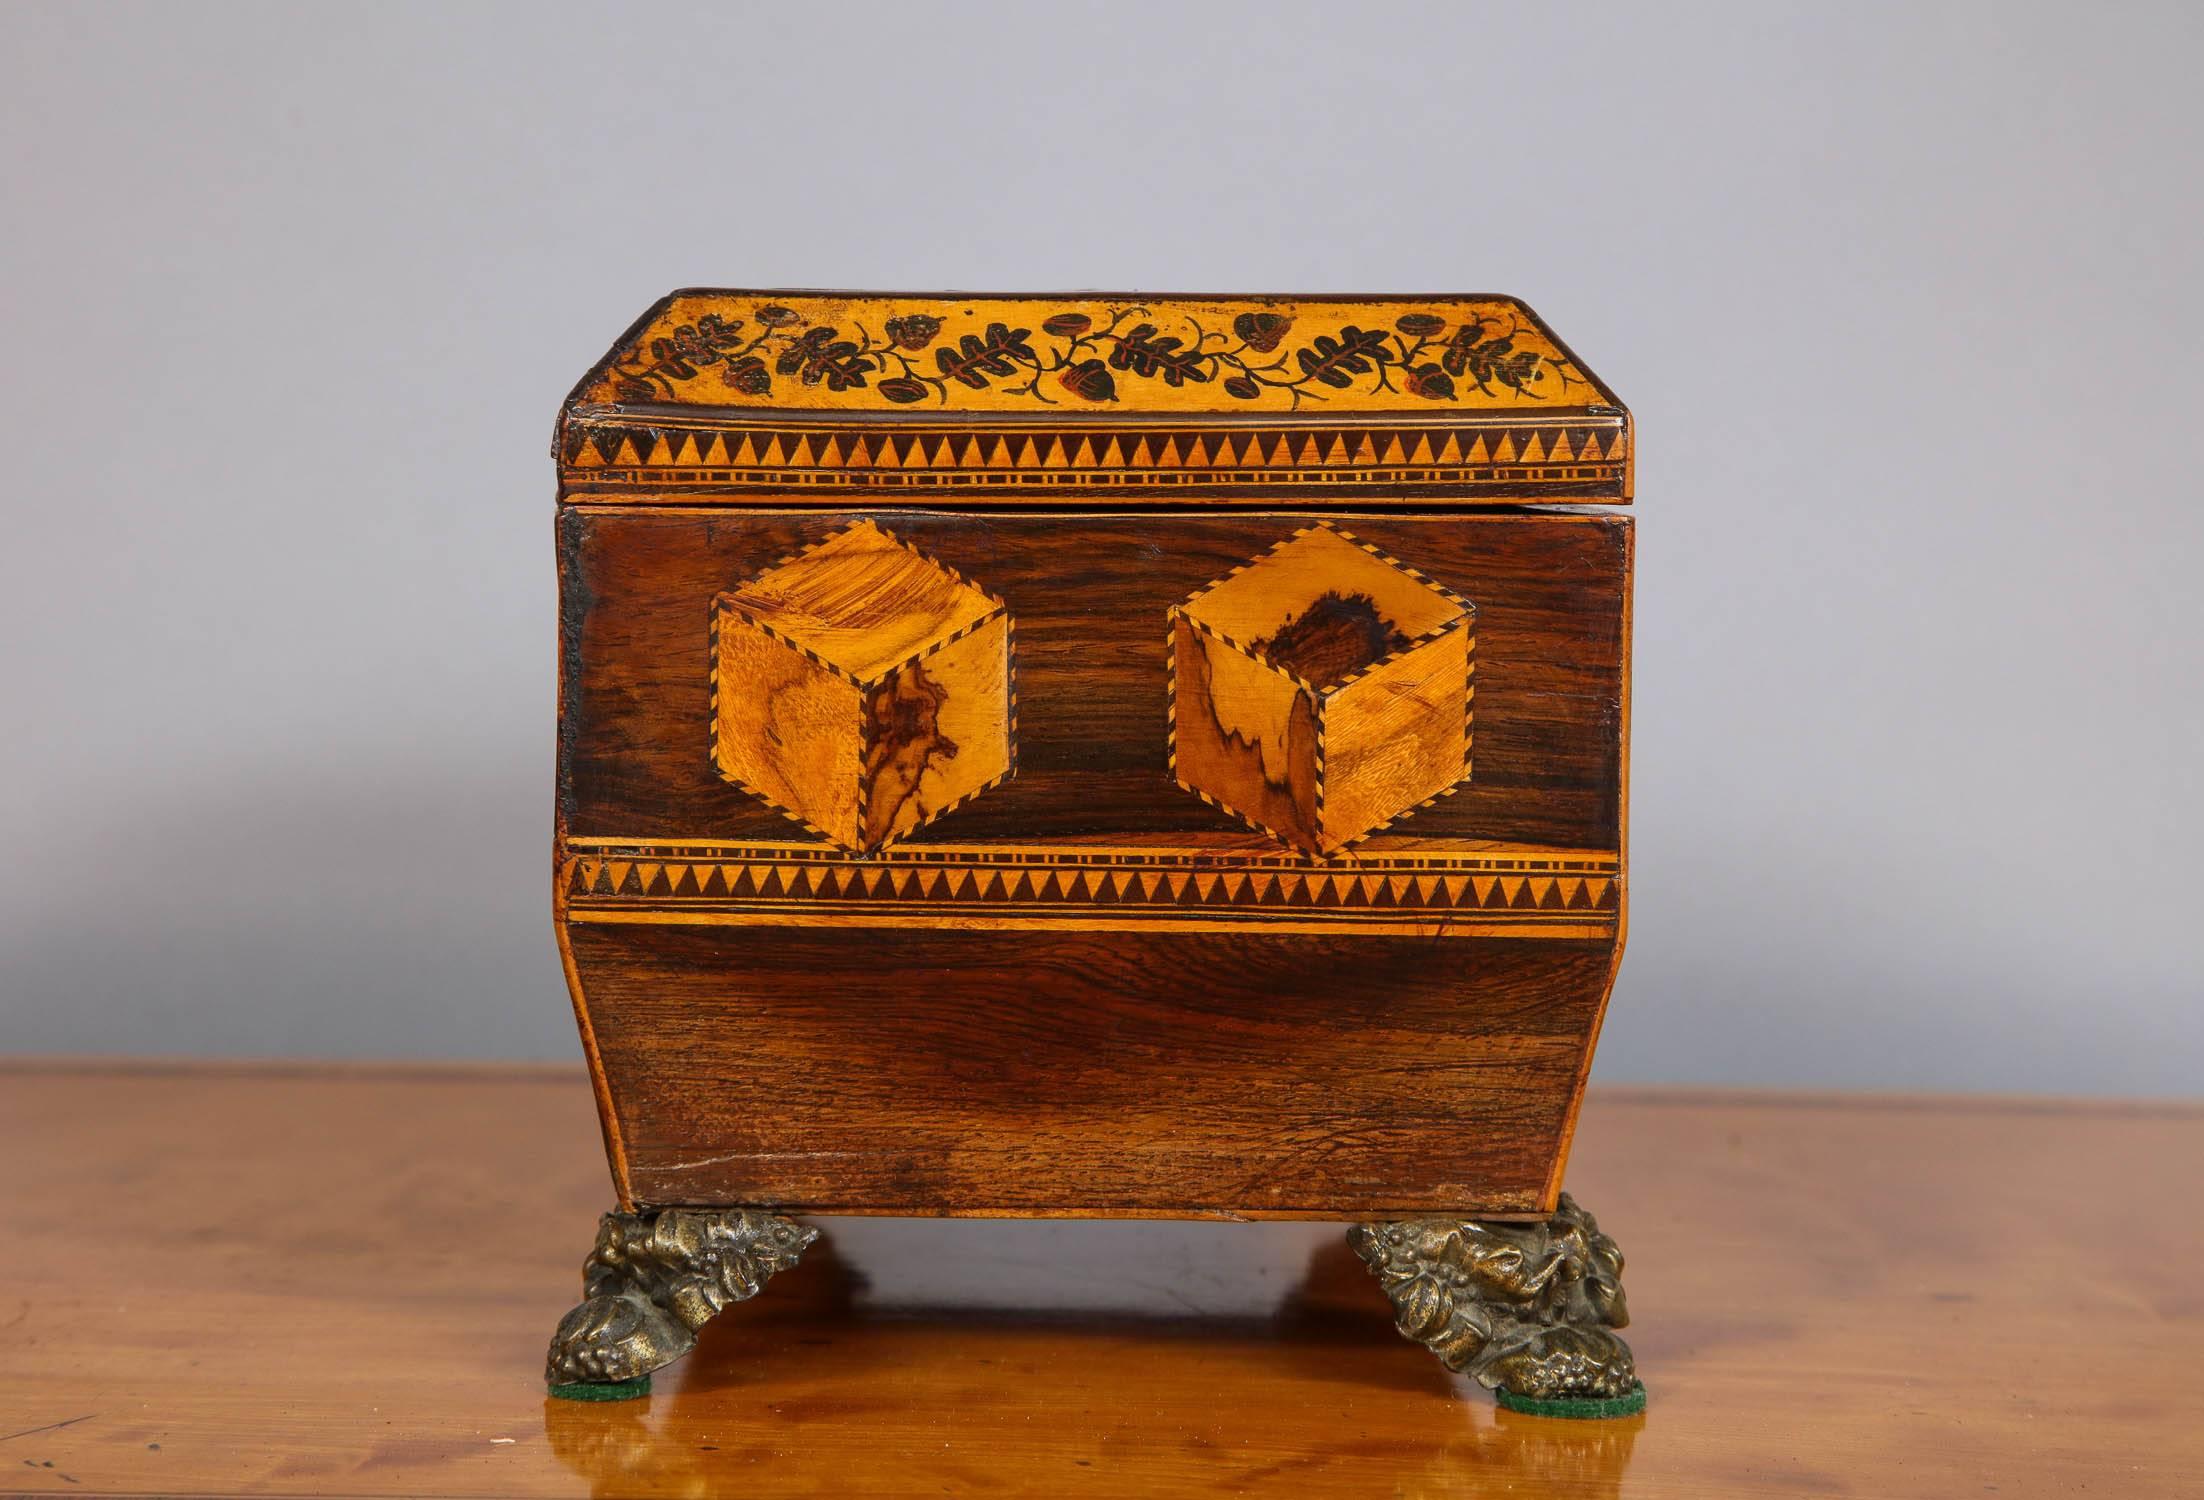 Fine early 19th century Tunbridge ware tea caddy, the top inlaid with geometric patterns, the canted sides with wood mosaic ivy banding over further geometric inlay, standing on gilt brass feet, the whole with good rich color and